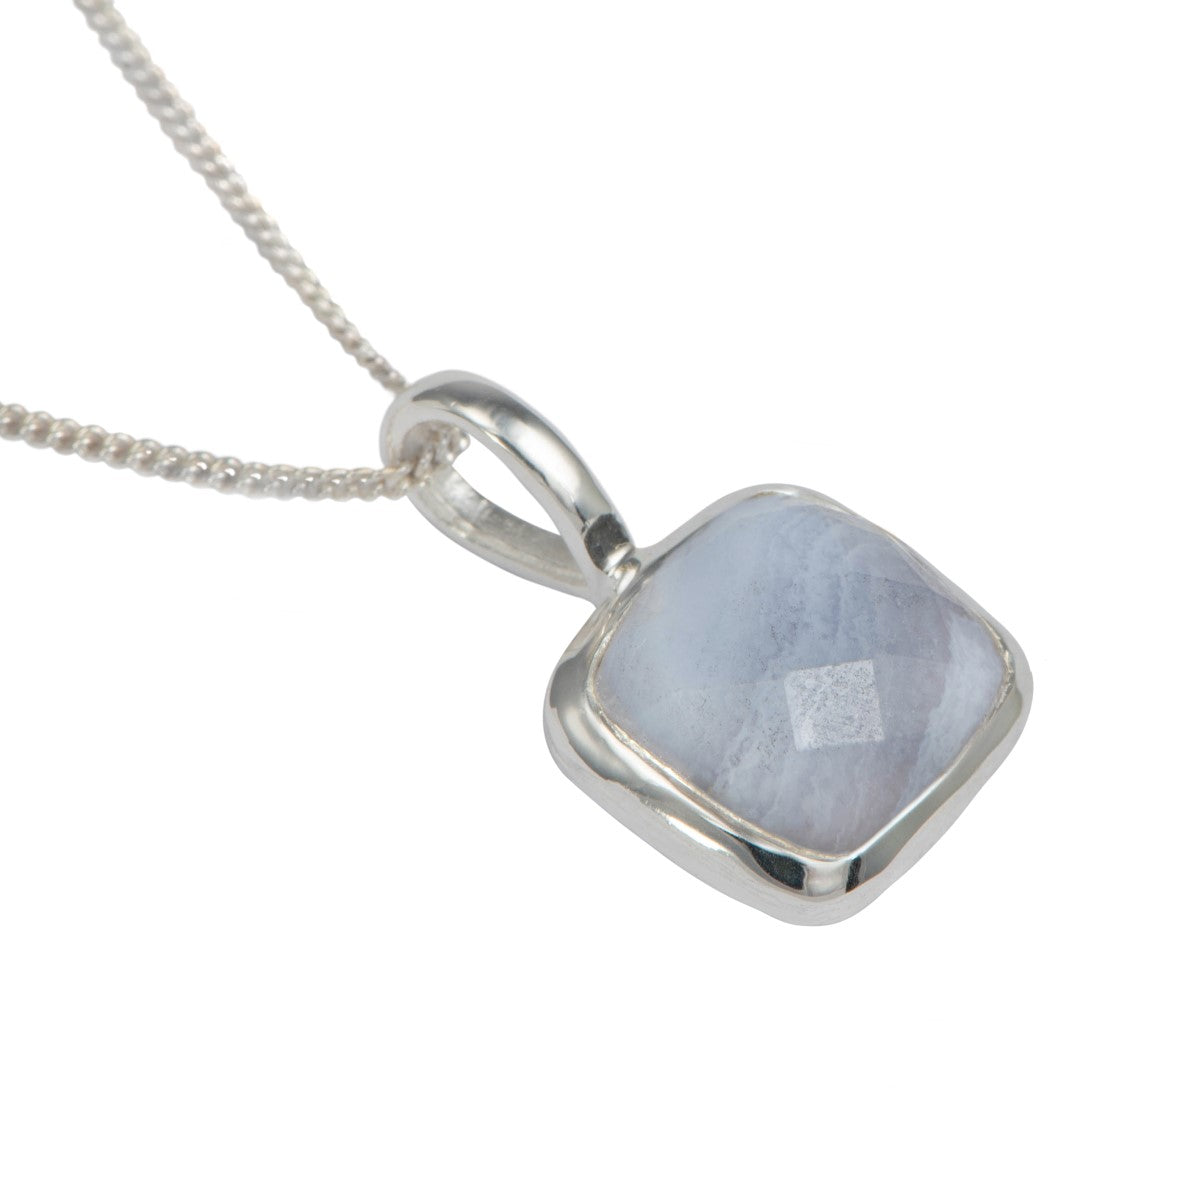 Sterling Silver Pendant Necklace with a Faceted Square Gemstone - Blue Laced Agate